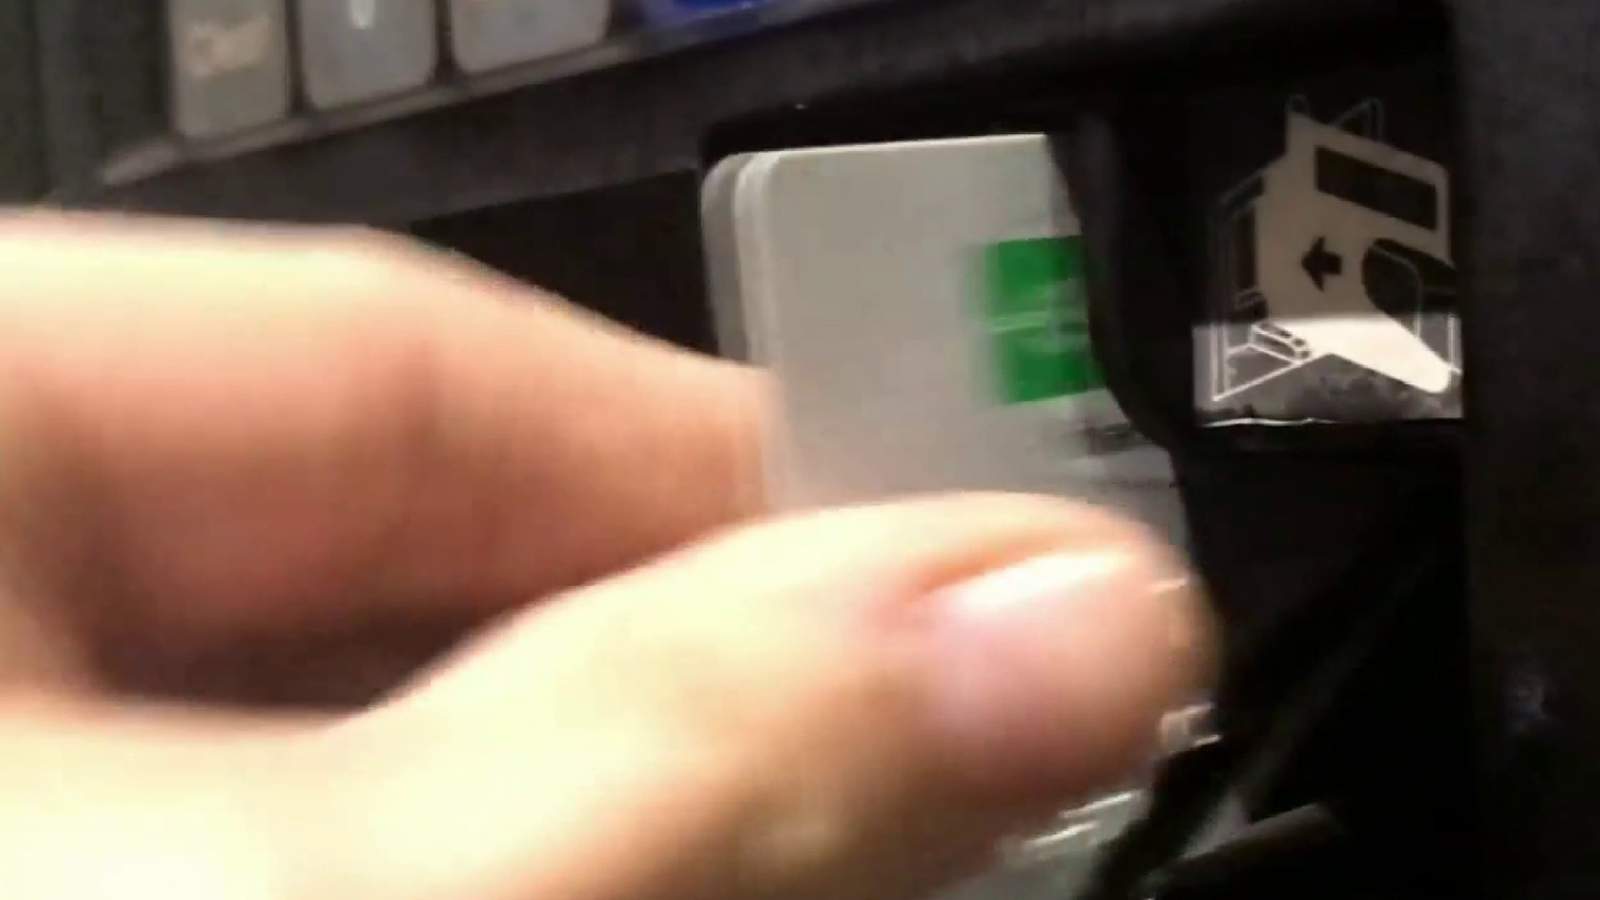 Inspector shares best defense against skimming devices at gas stations